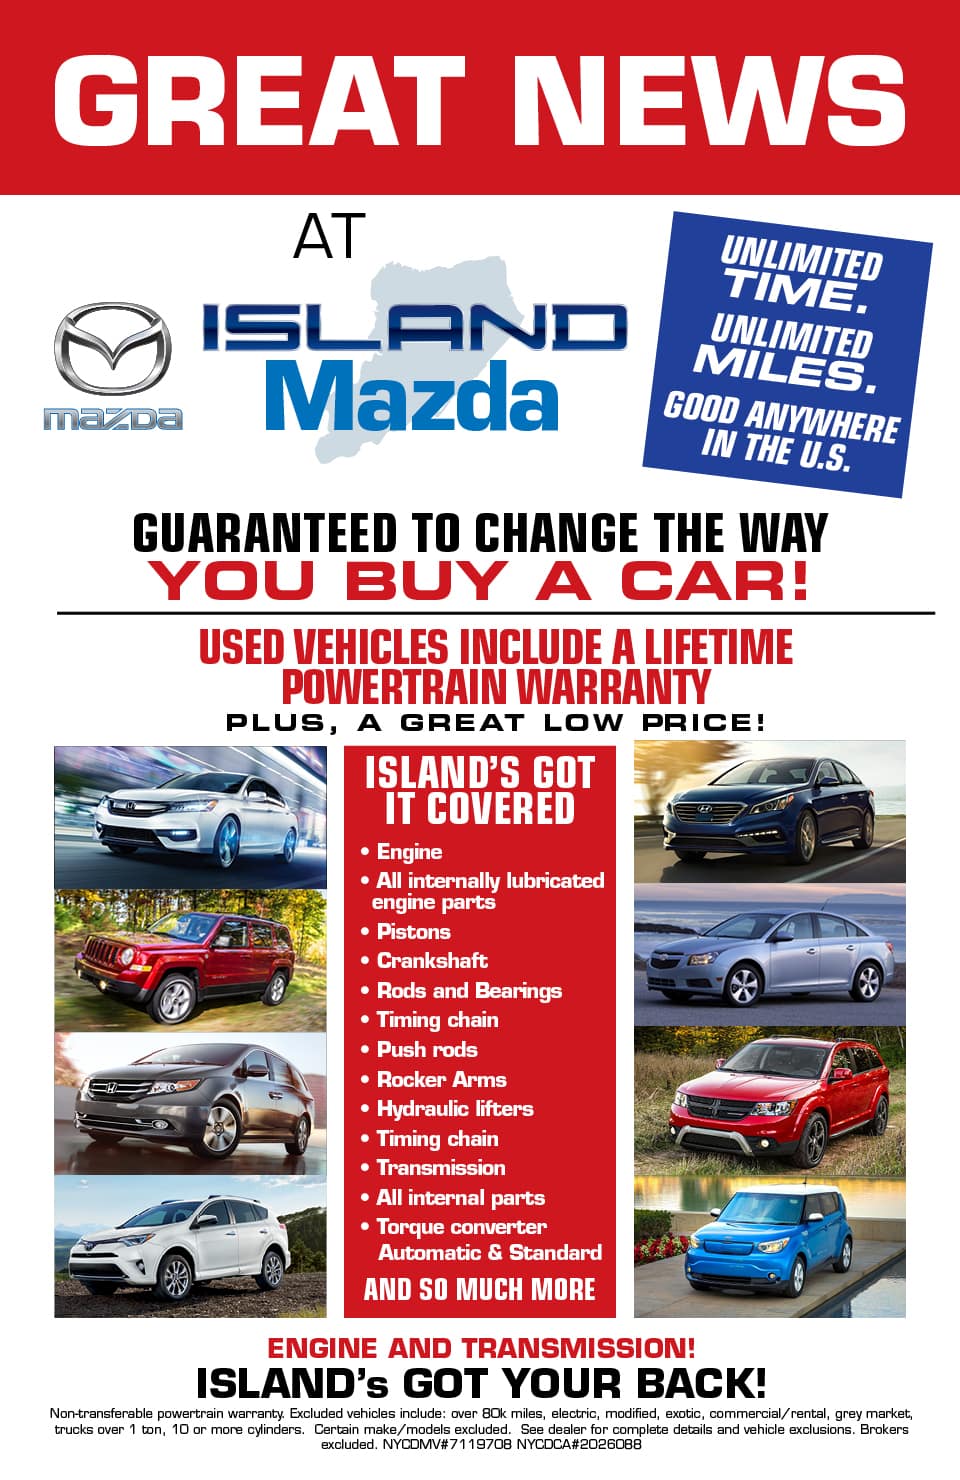 Looking for a new or used mazda in connecticut? Mazda Dealership In Staten Island Car Lease Specials Near New York City